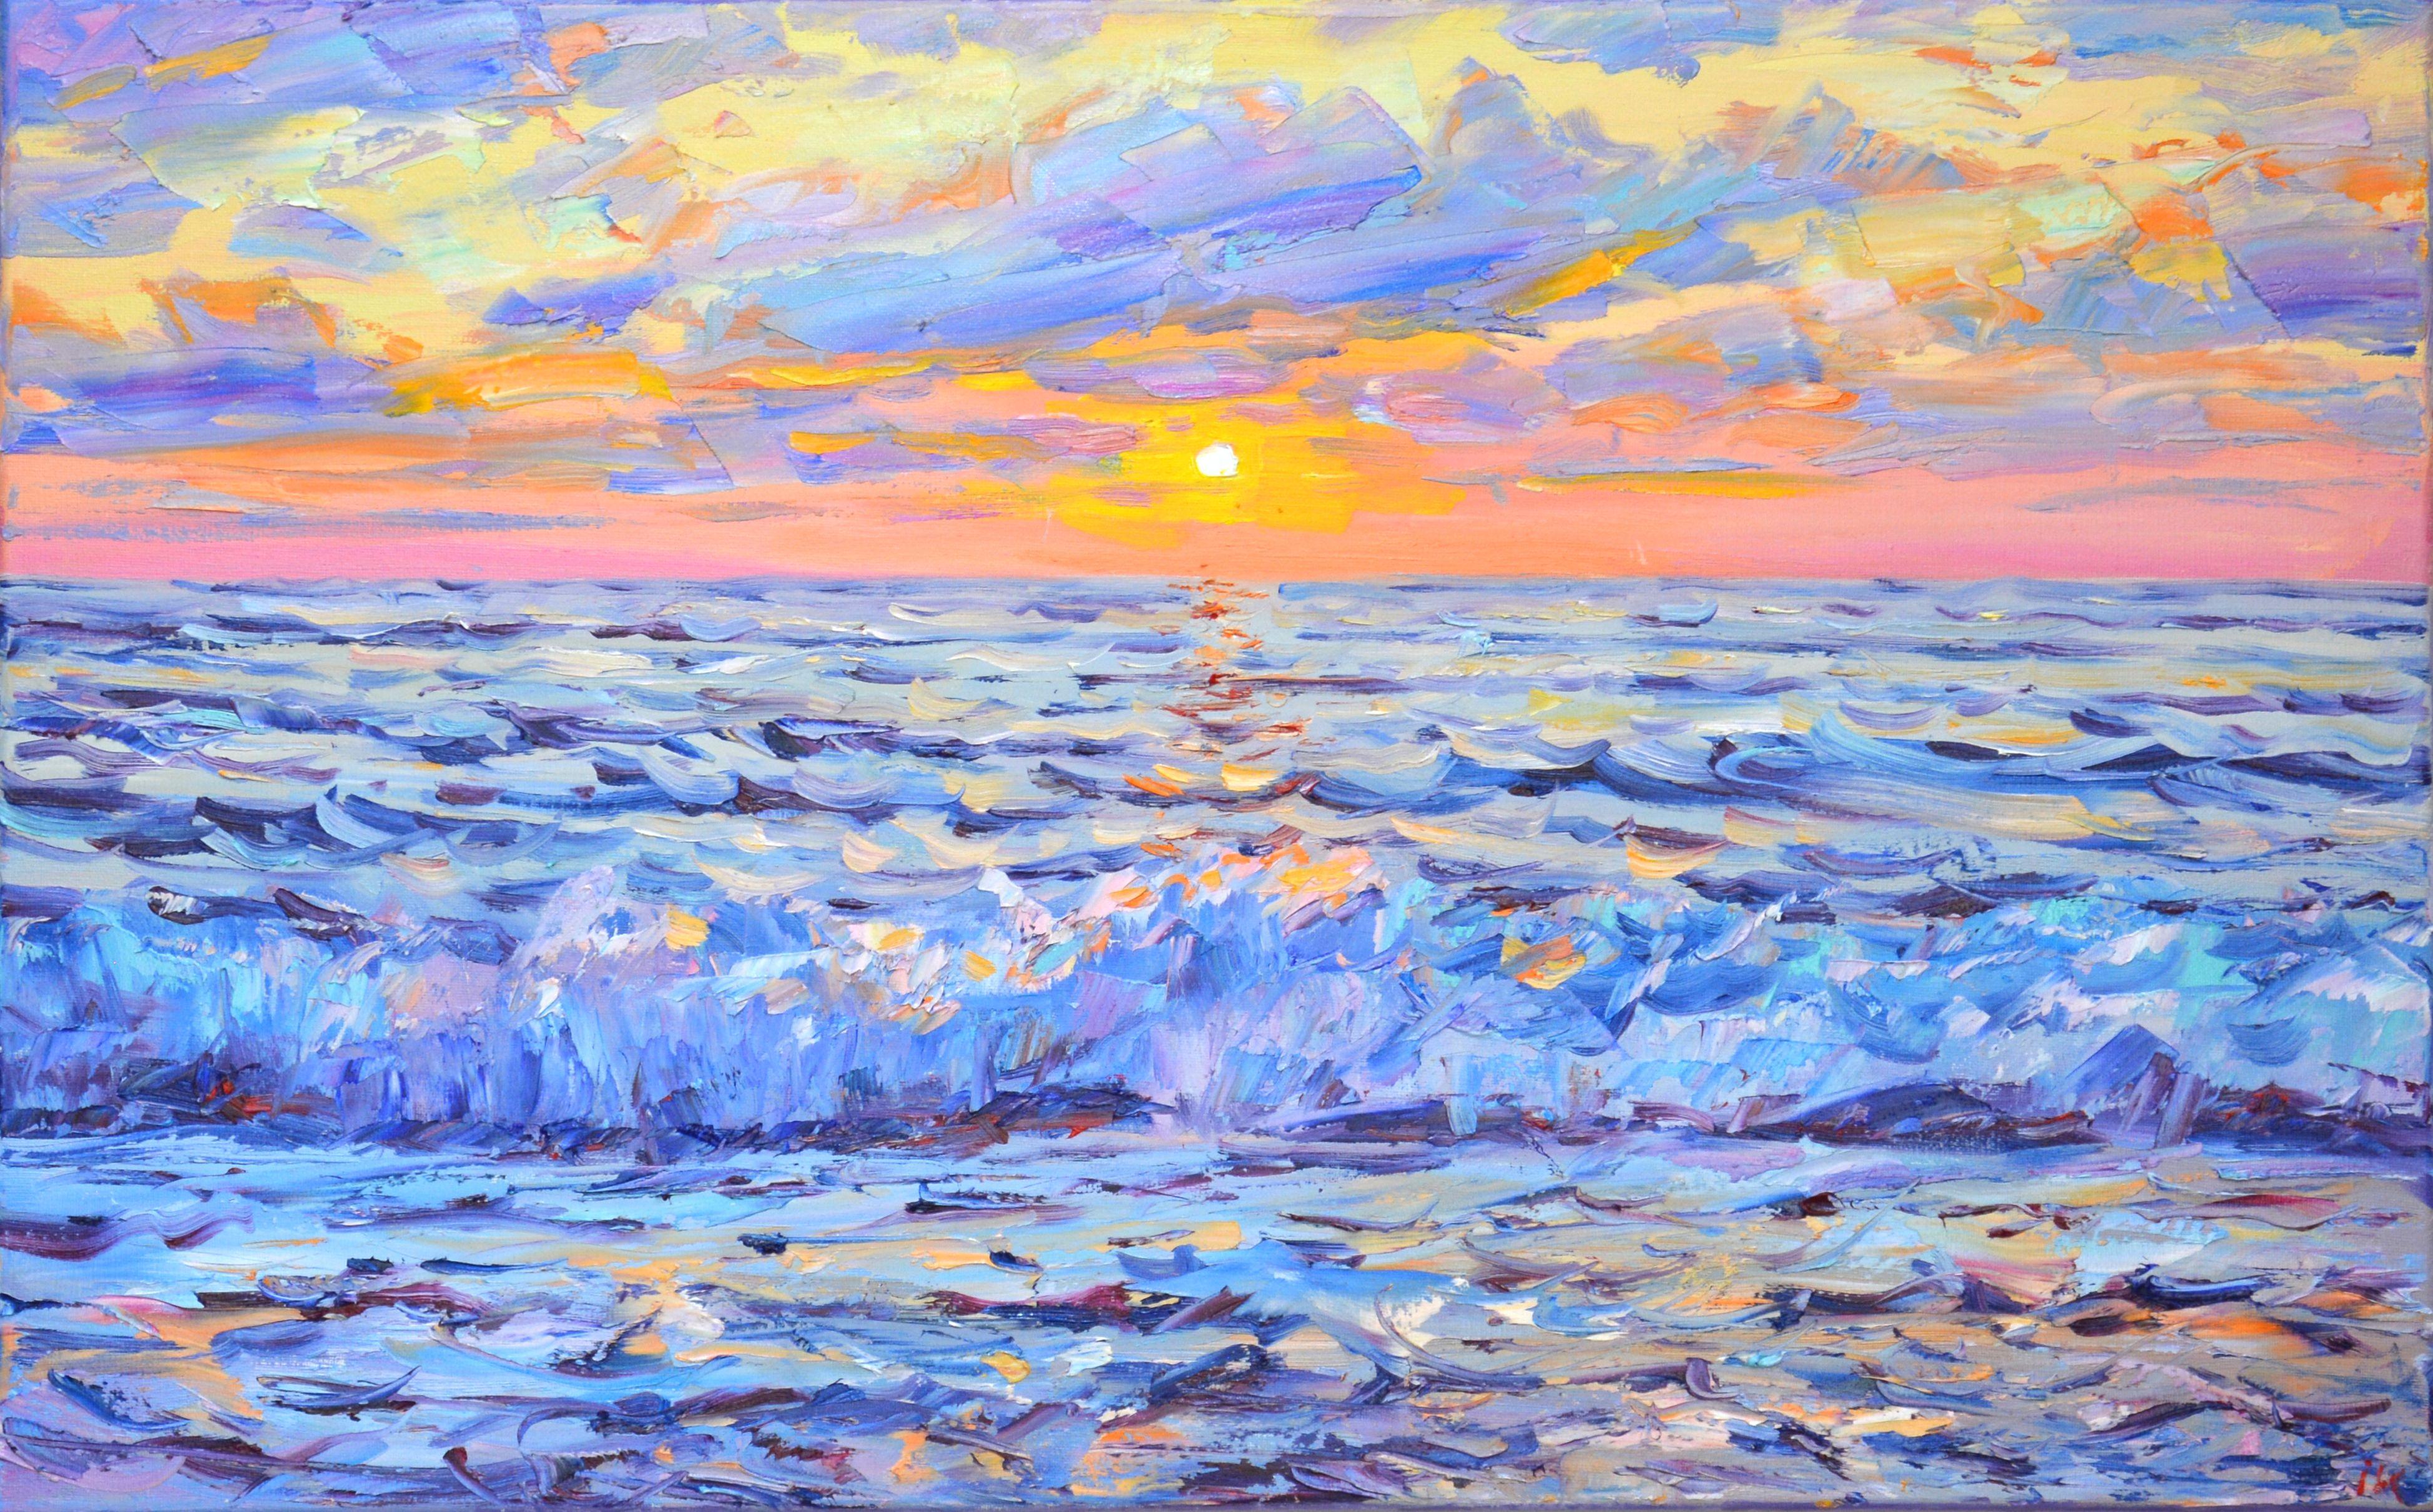 The ocean, sunset over the water, sky, waves, sea foam, serene views create an atmosphere of romance and relaxation. Impressionism. The work is written expressively using brushes and a palette knife.  Part of an ongoing series of seascapes that